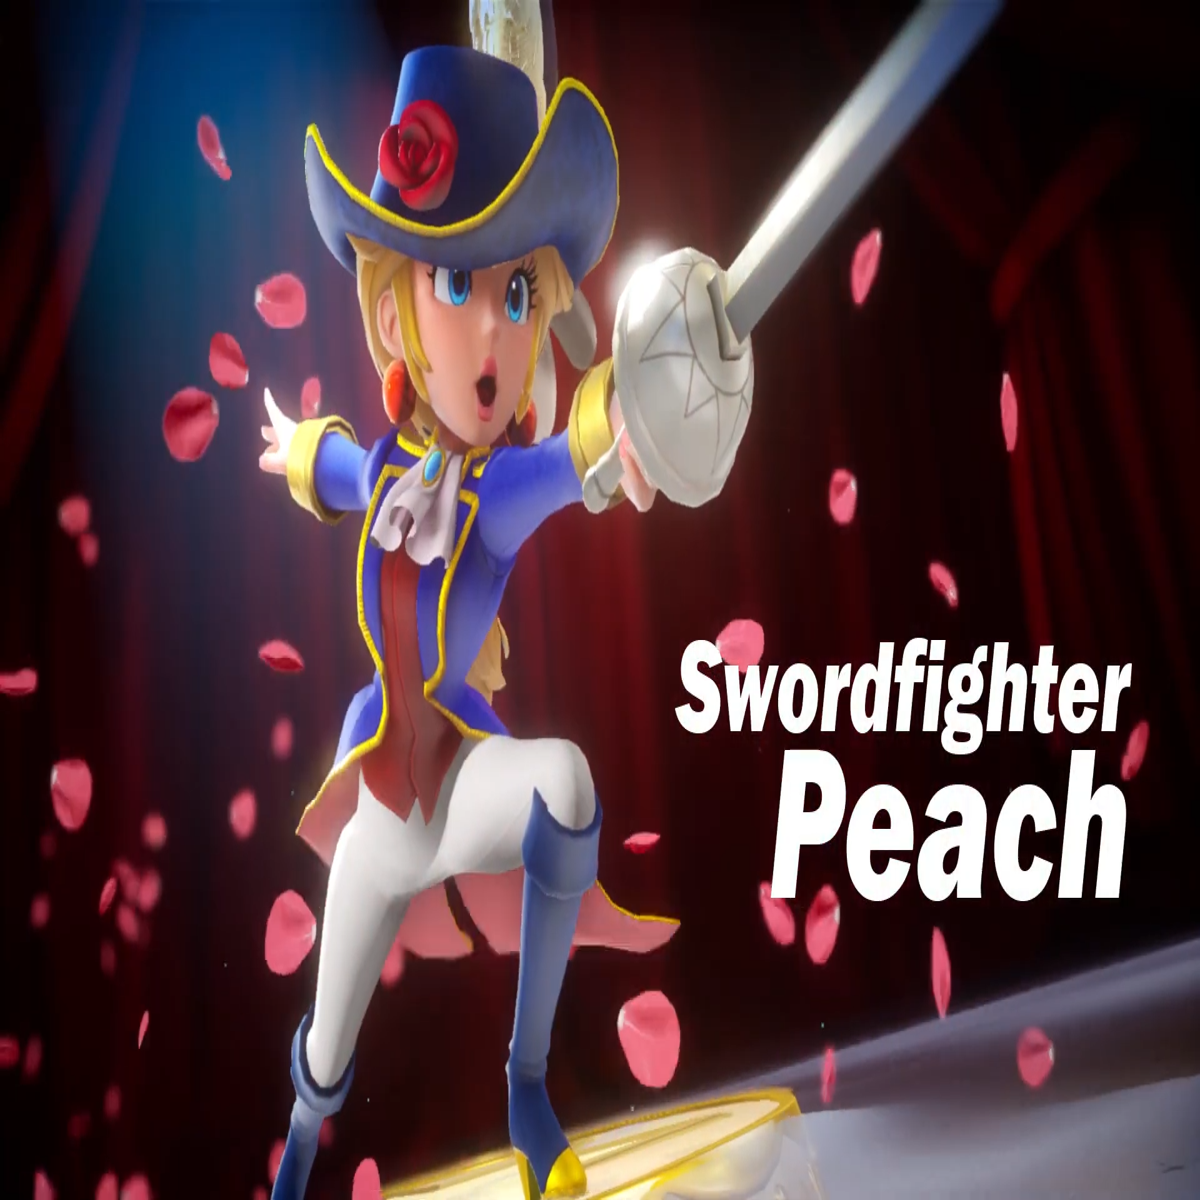 Princess Peach: Showtime!, Paper Mario: The Thousand-Year Door, F